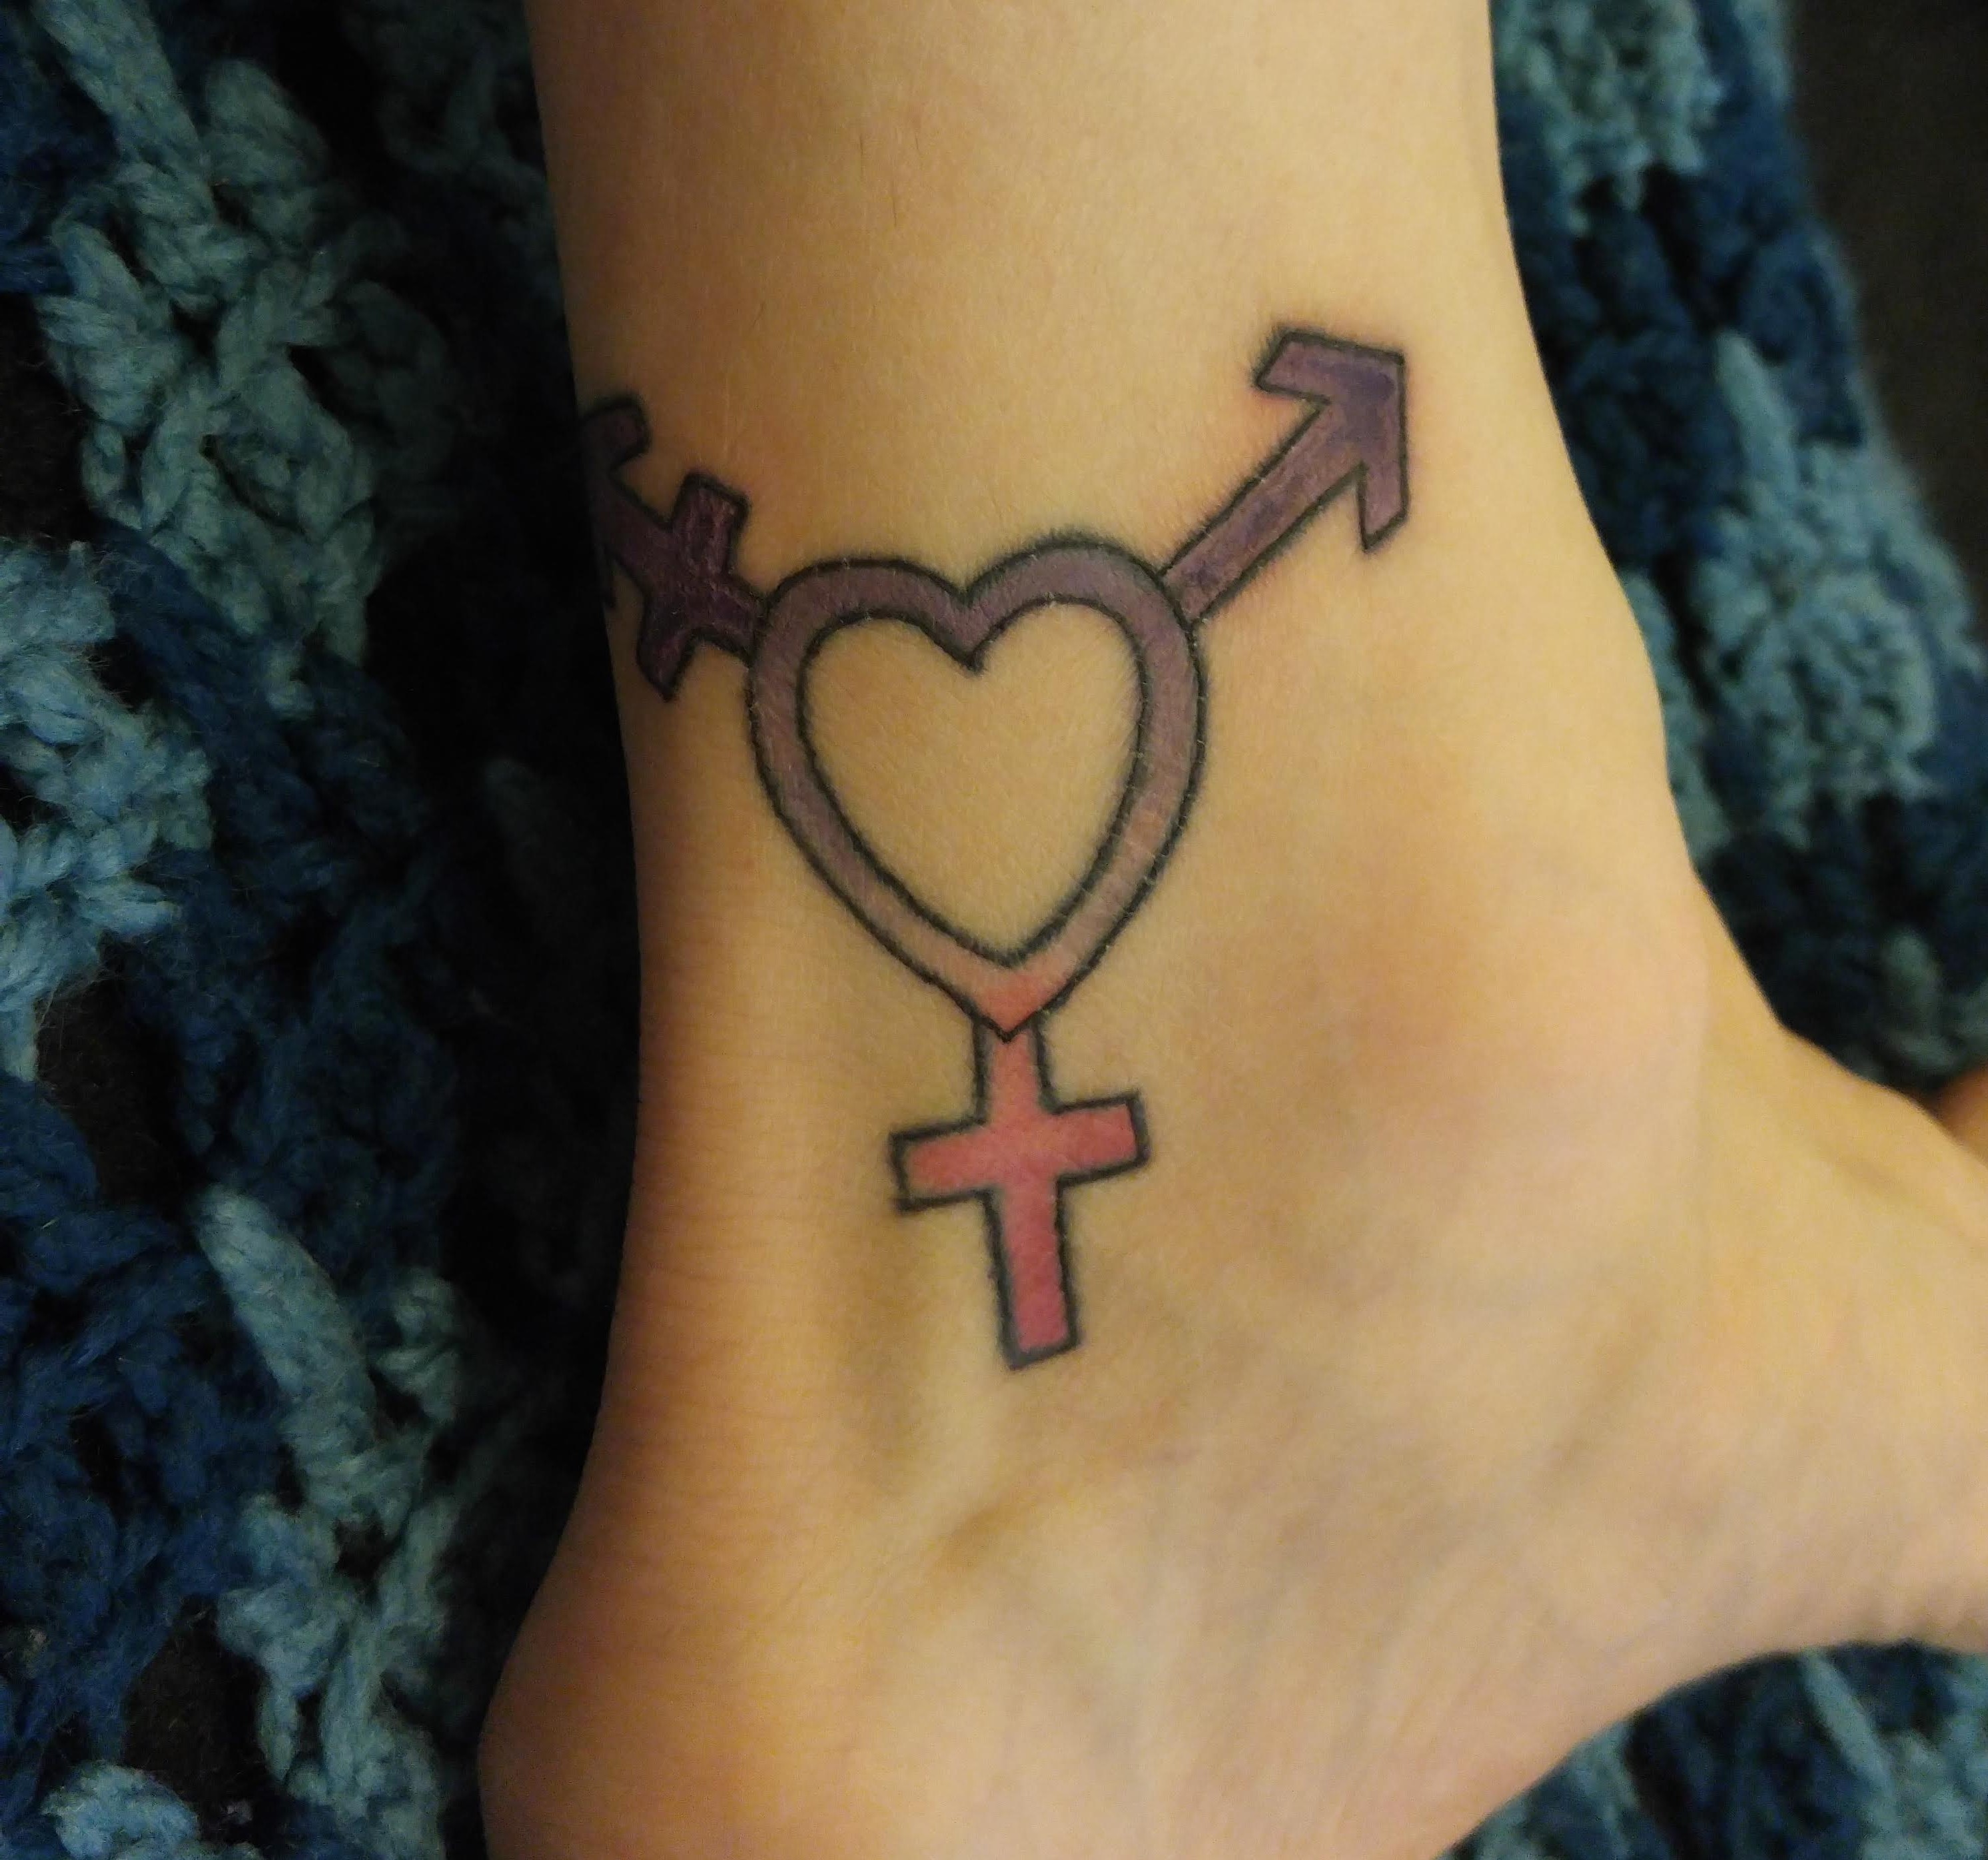 Two extra branches added to the female symbol to turn it into a transgender symbol.